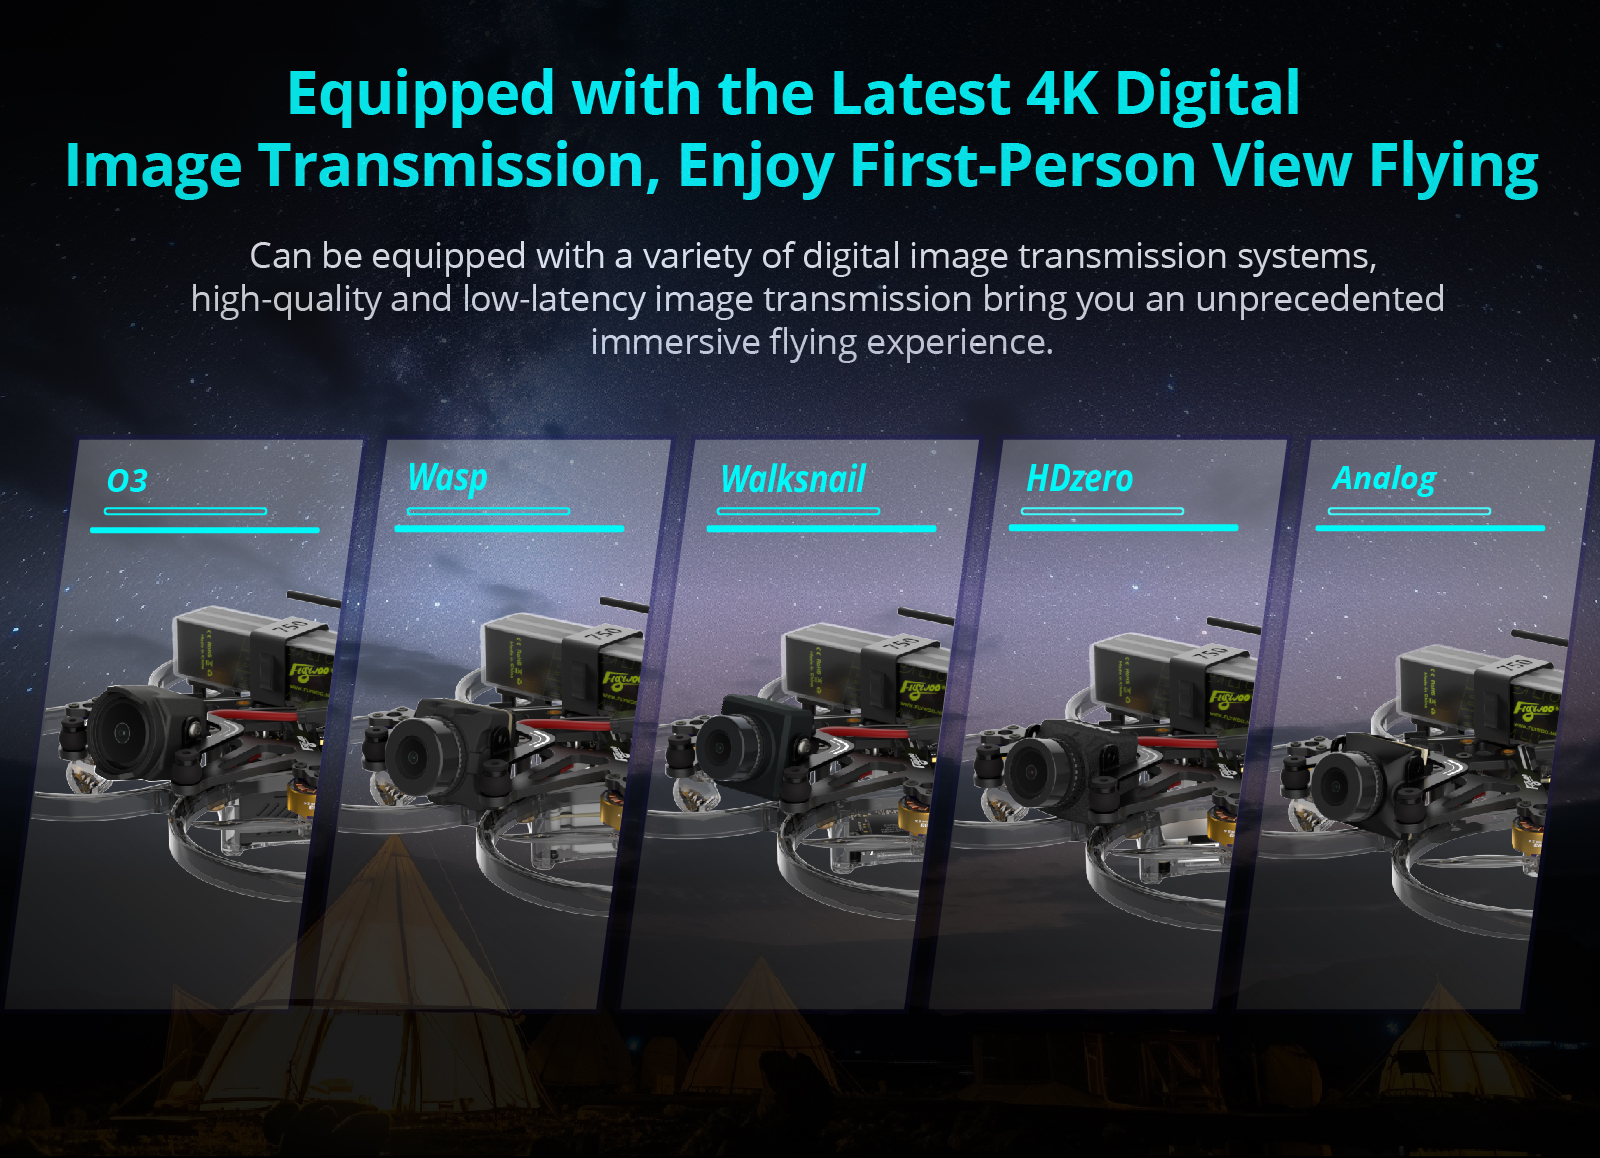 Enjoy First-Person View Flying Can be equipped with a variety of digital image transmission